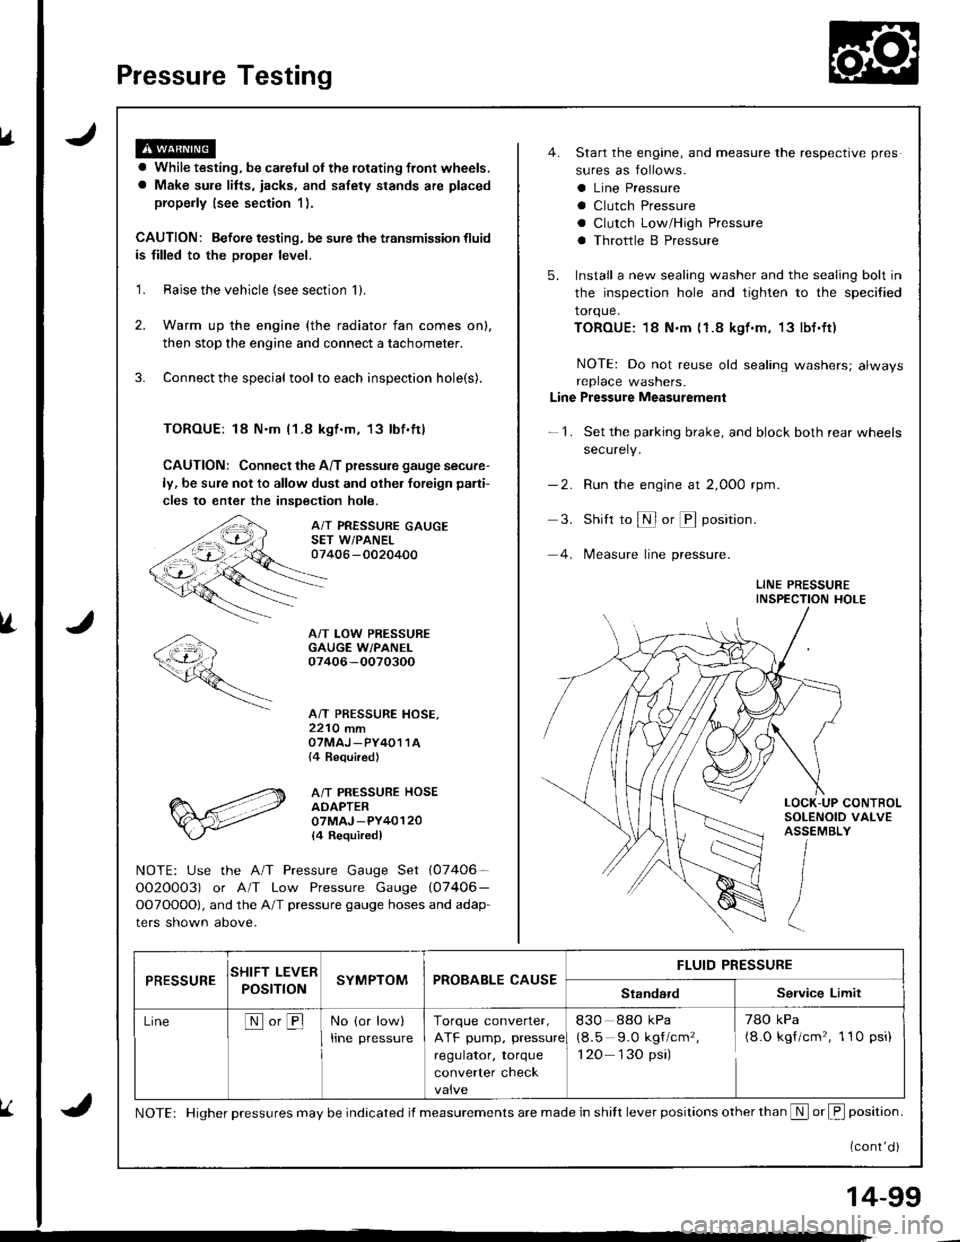 HONDA INTEGRA 1998 4.G User Guide Pressure Testing
a While testing, be careJulot the rotating front wheels.
a Make sule litts, iacks, and safety stands are placed
properly (see section 1).
CAUTION: Befoie testing, be sure the transmis